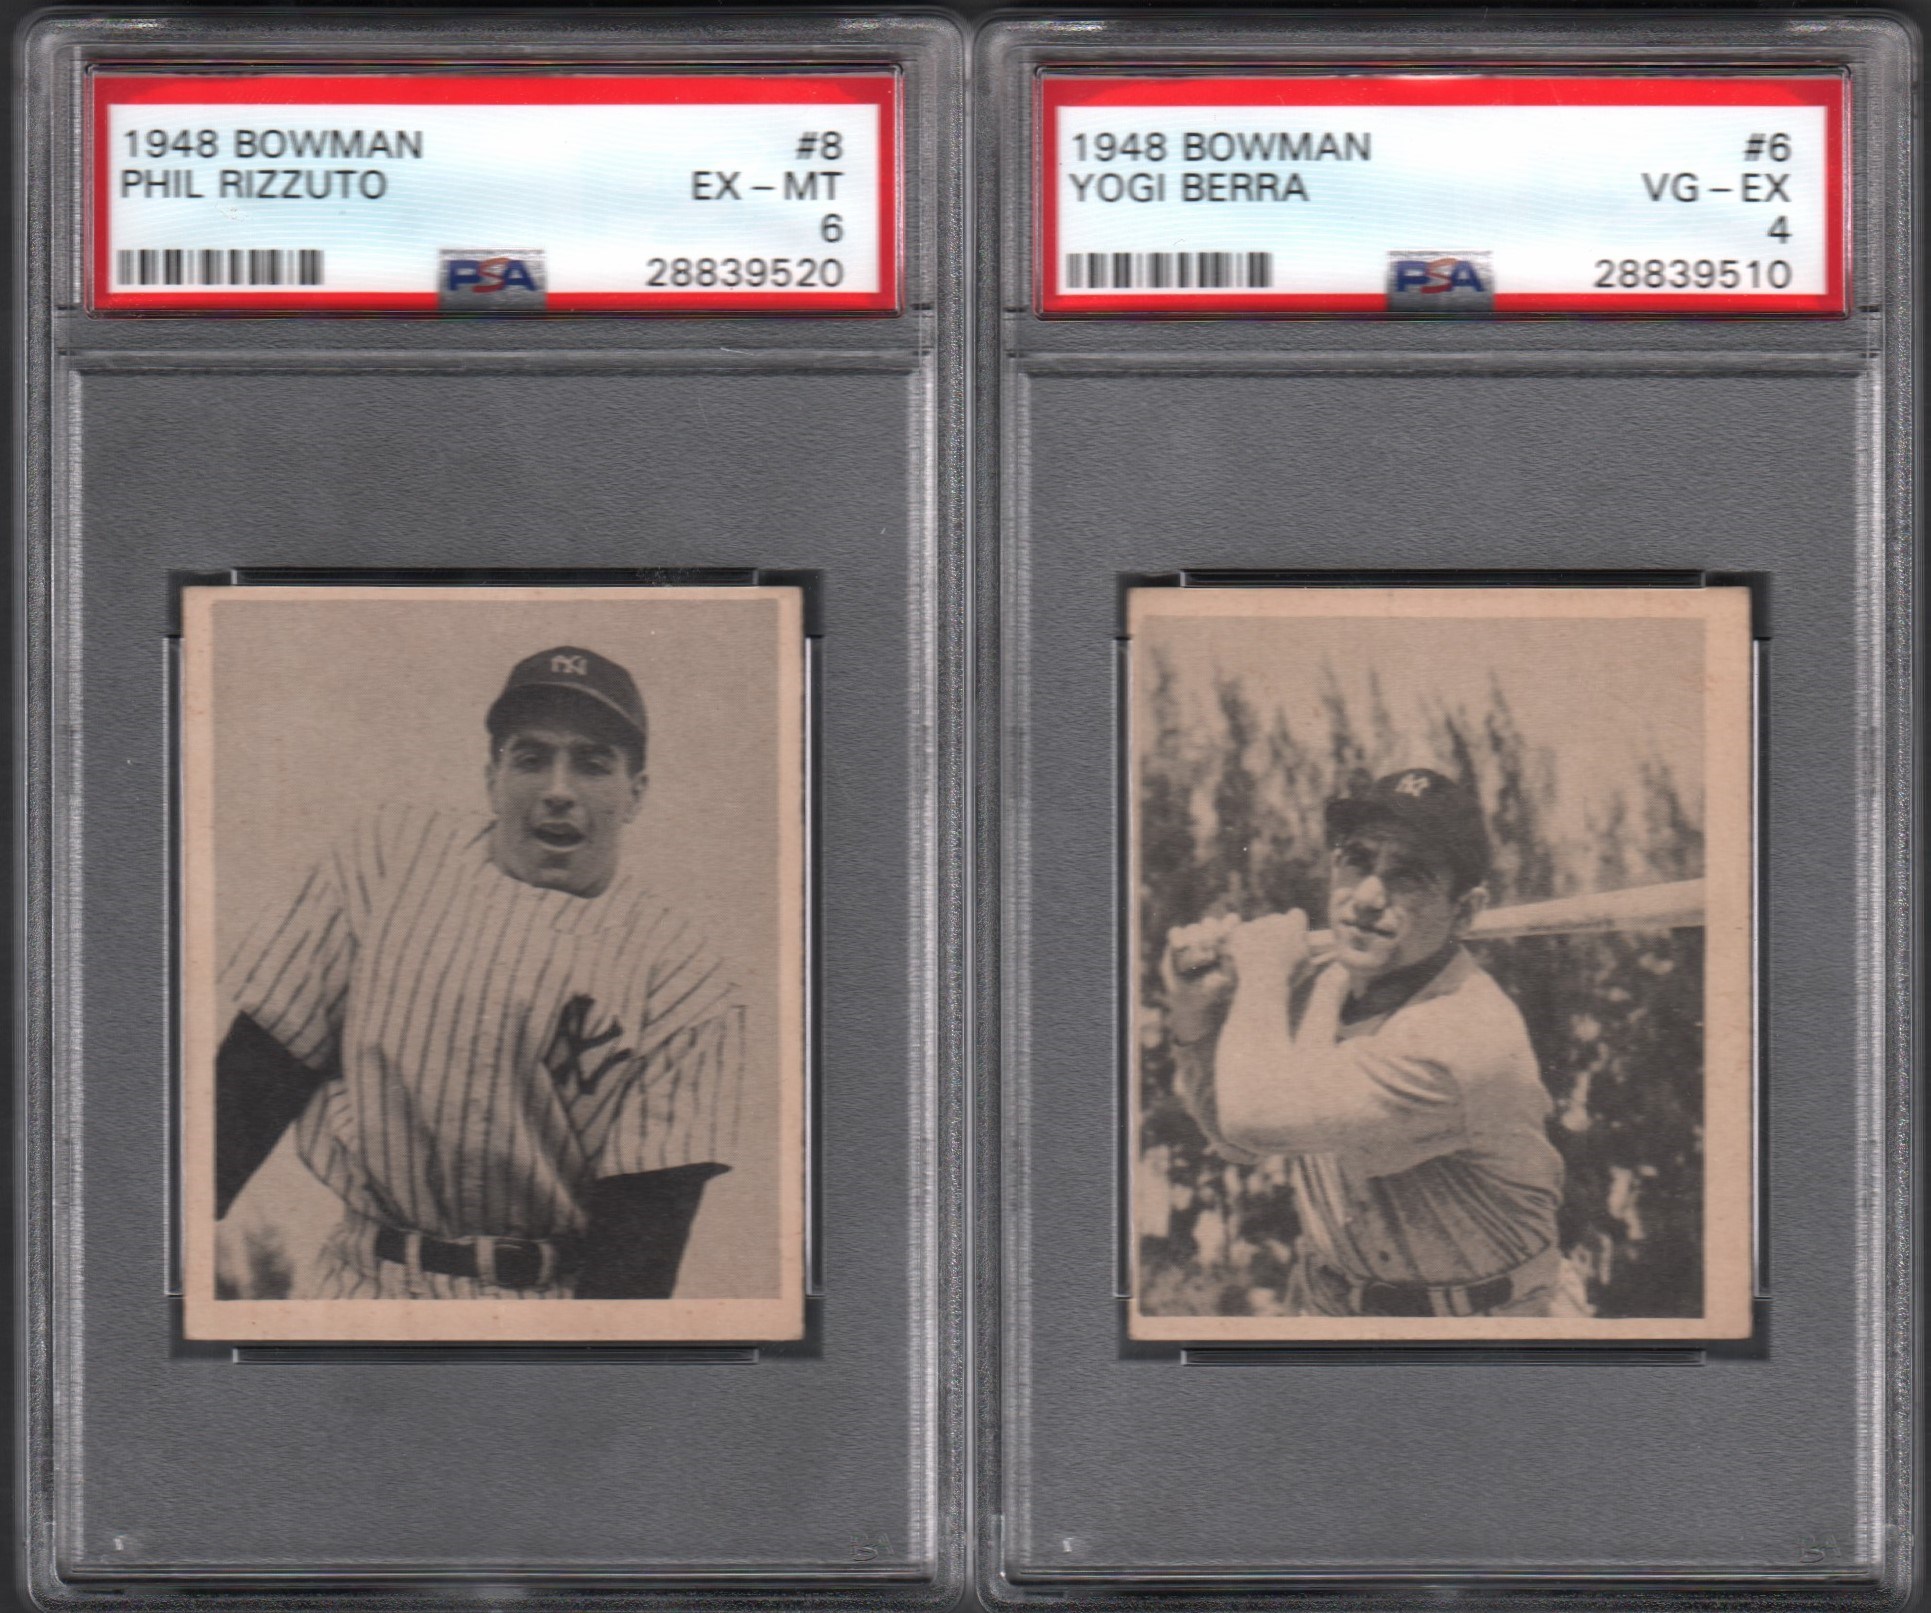 - 1948 Bowman Berra and Rizzuto PSA Graded Rookie Cards